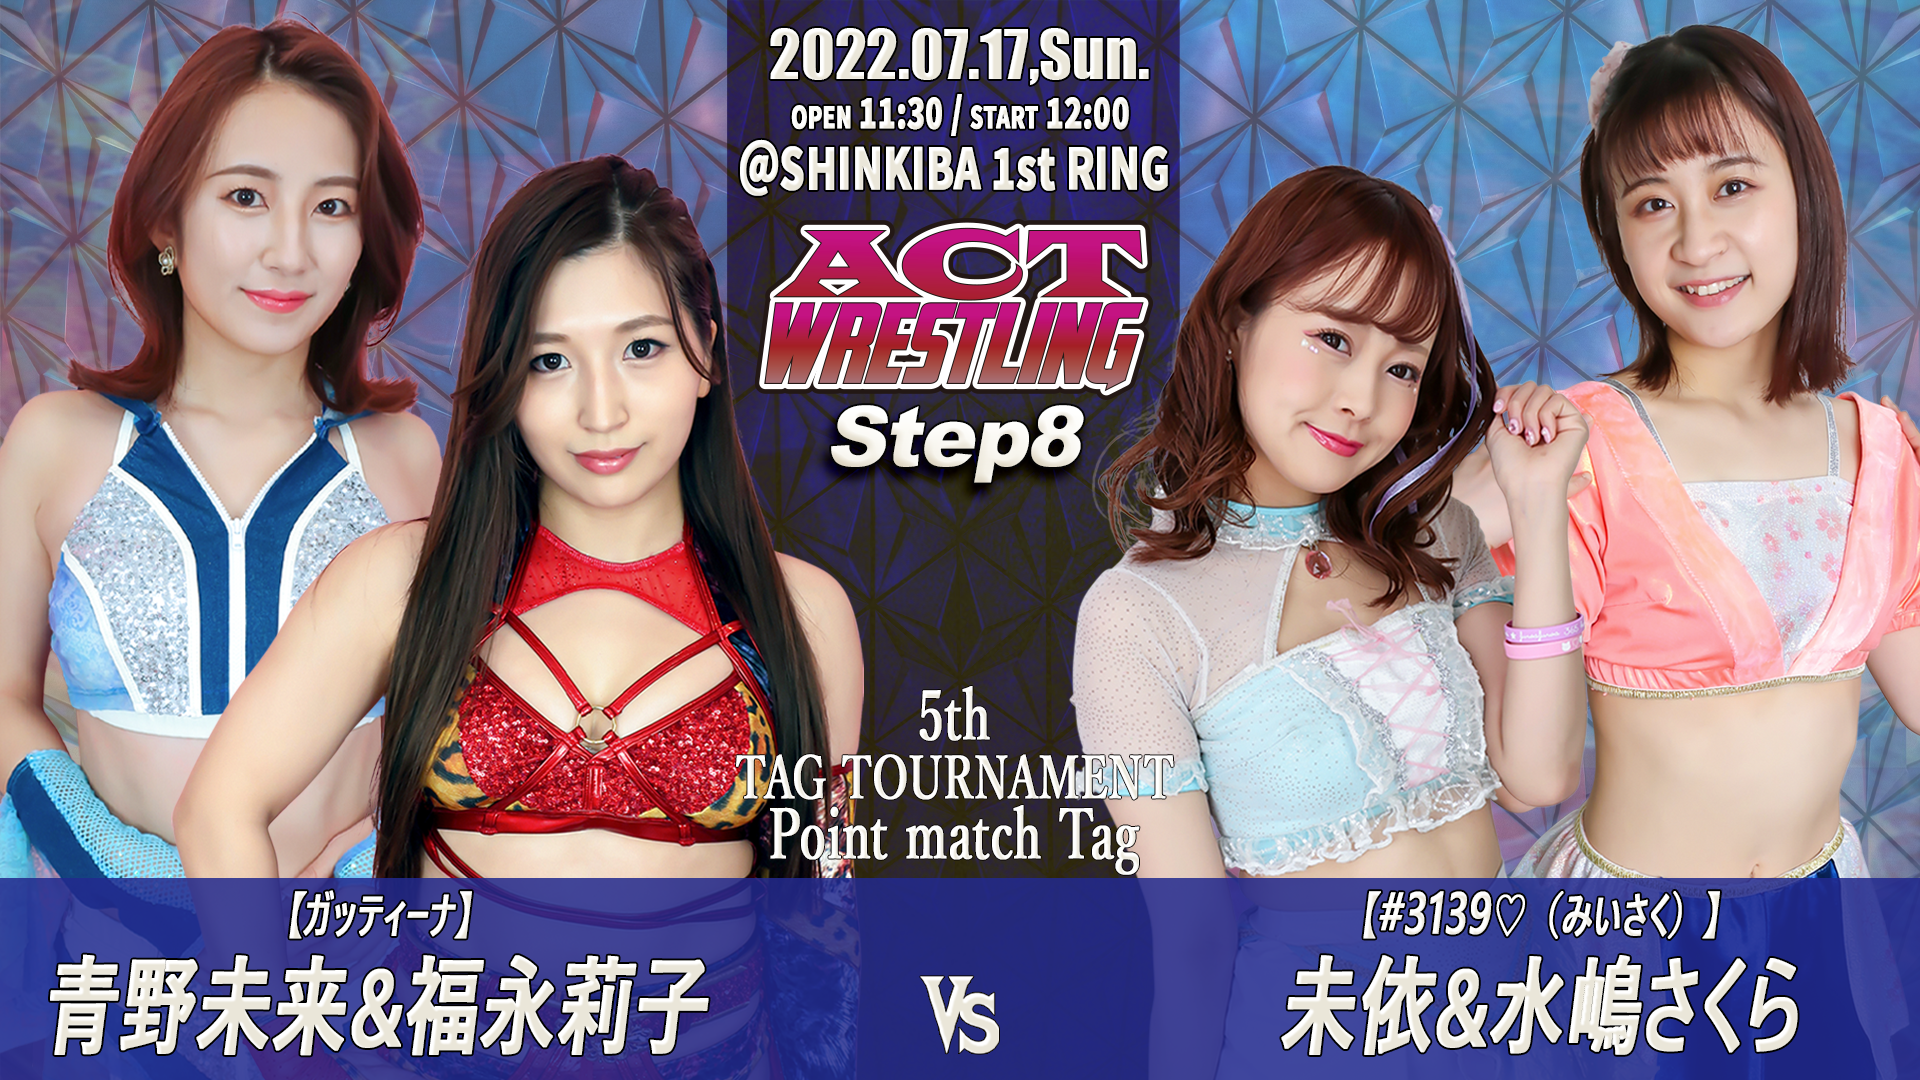 2022.07.17,Sun. / ACTwrestling Step8 | Actwres girl'Z OFFICIAL WEBSITE